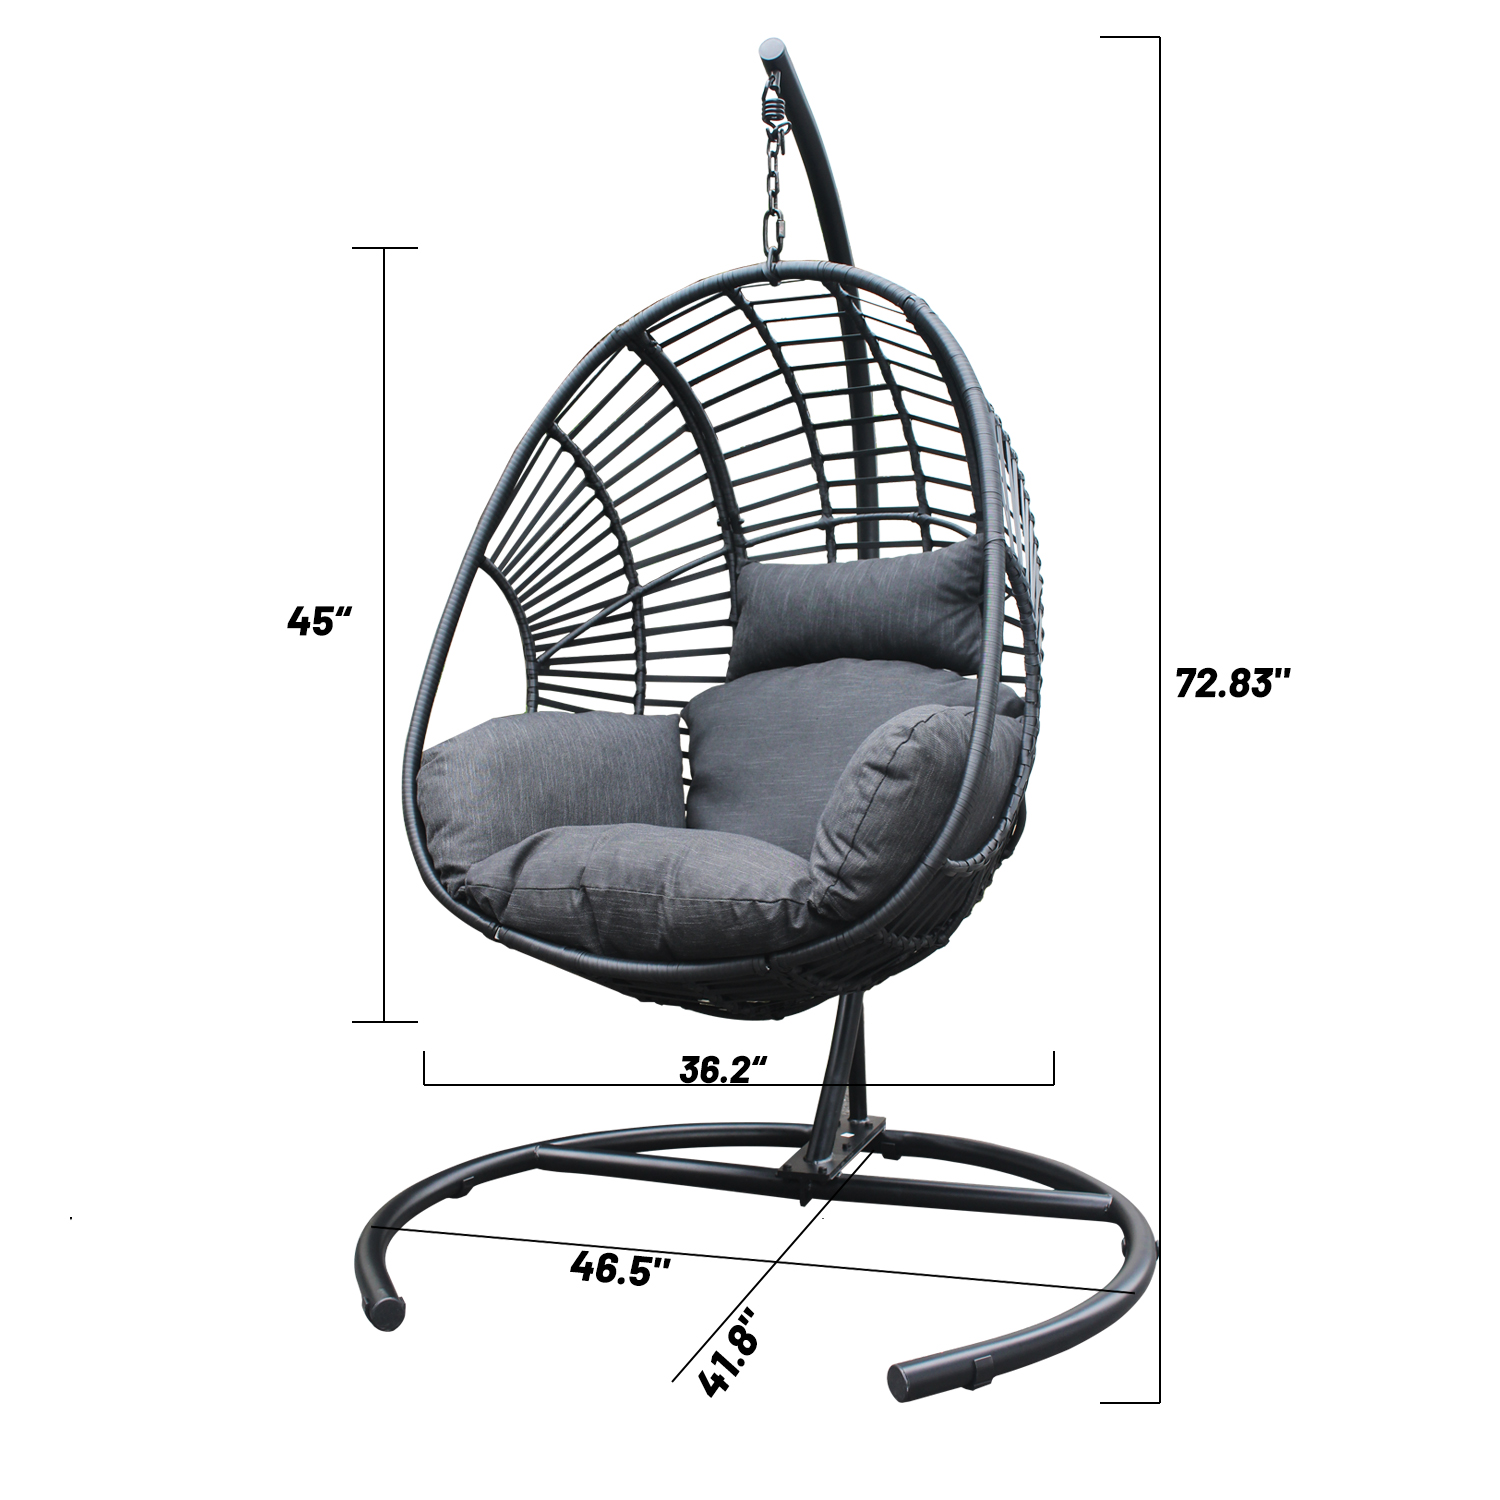 High Quality Outdoor Indoor Wicker Swing Egg Chair W400S00007